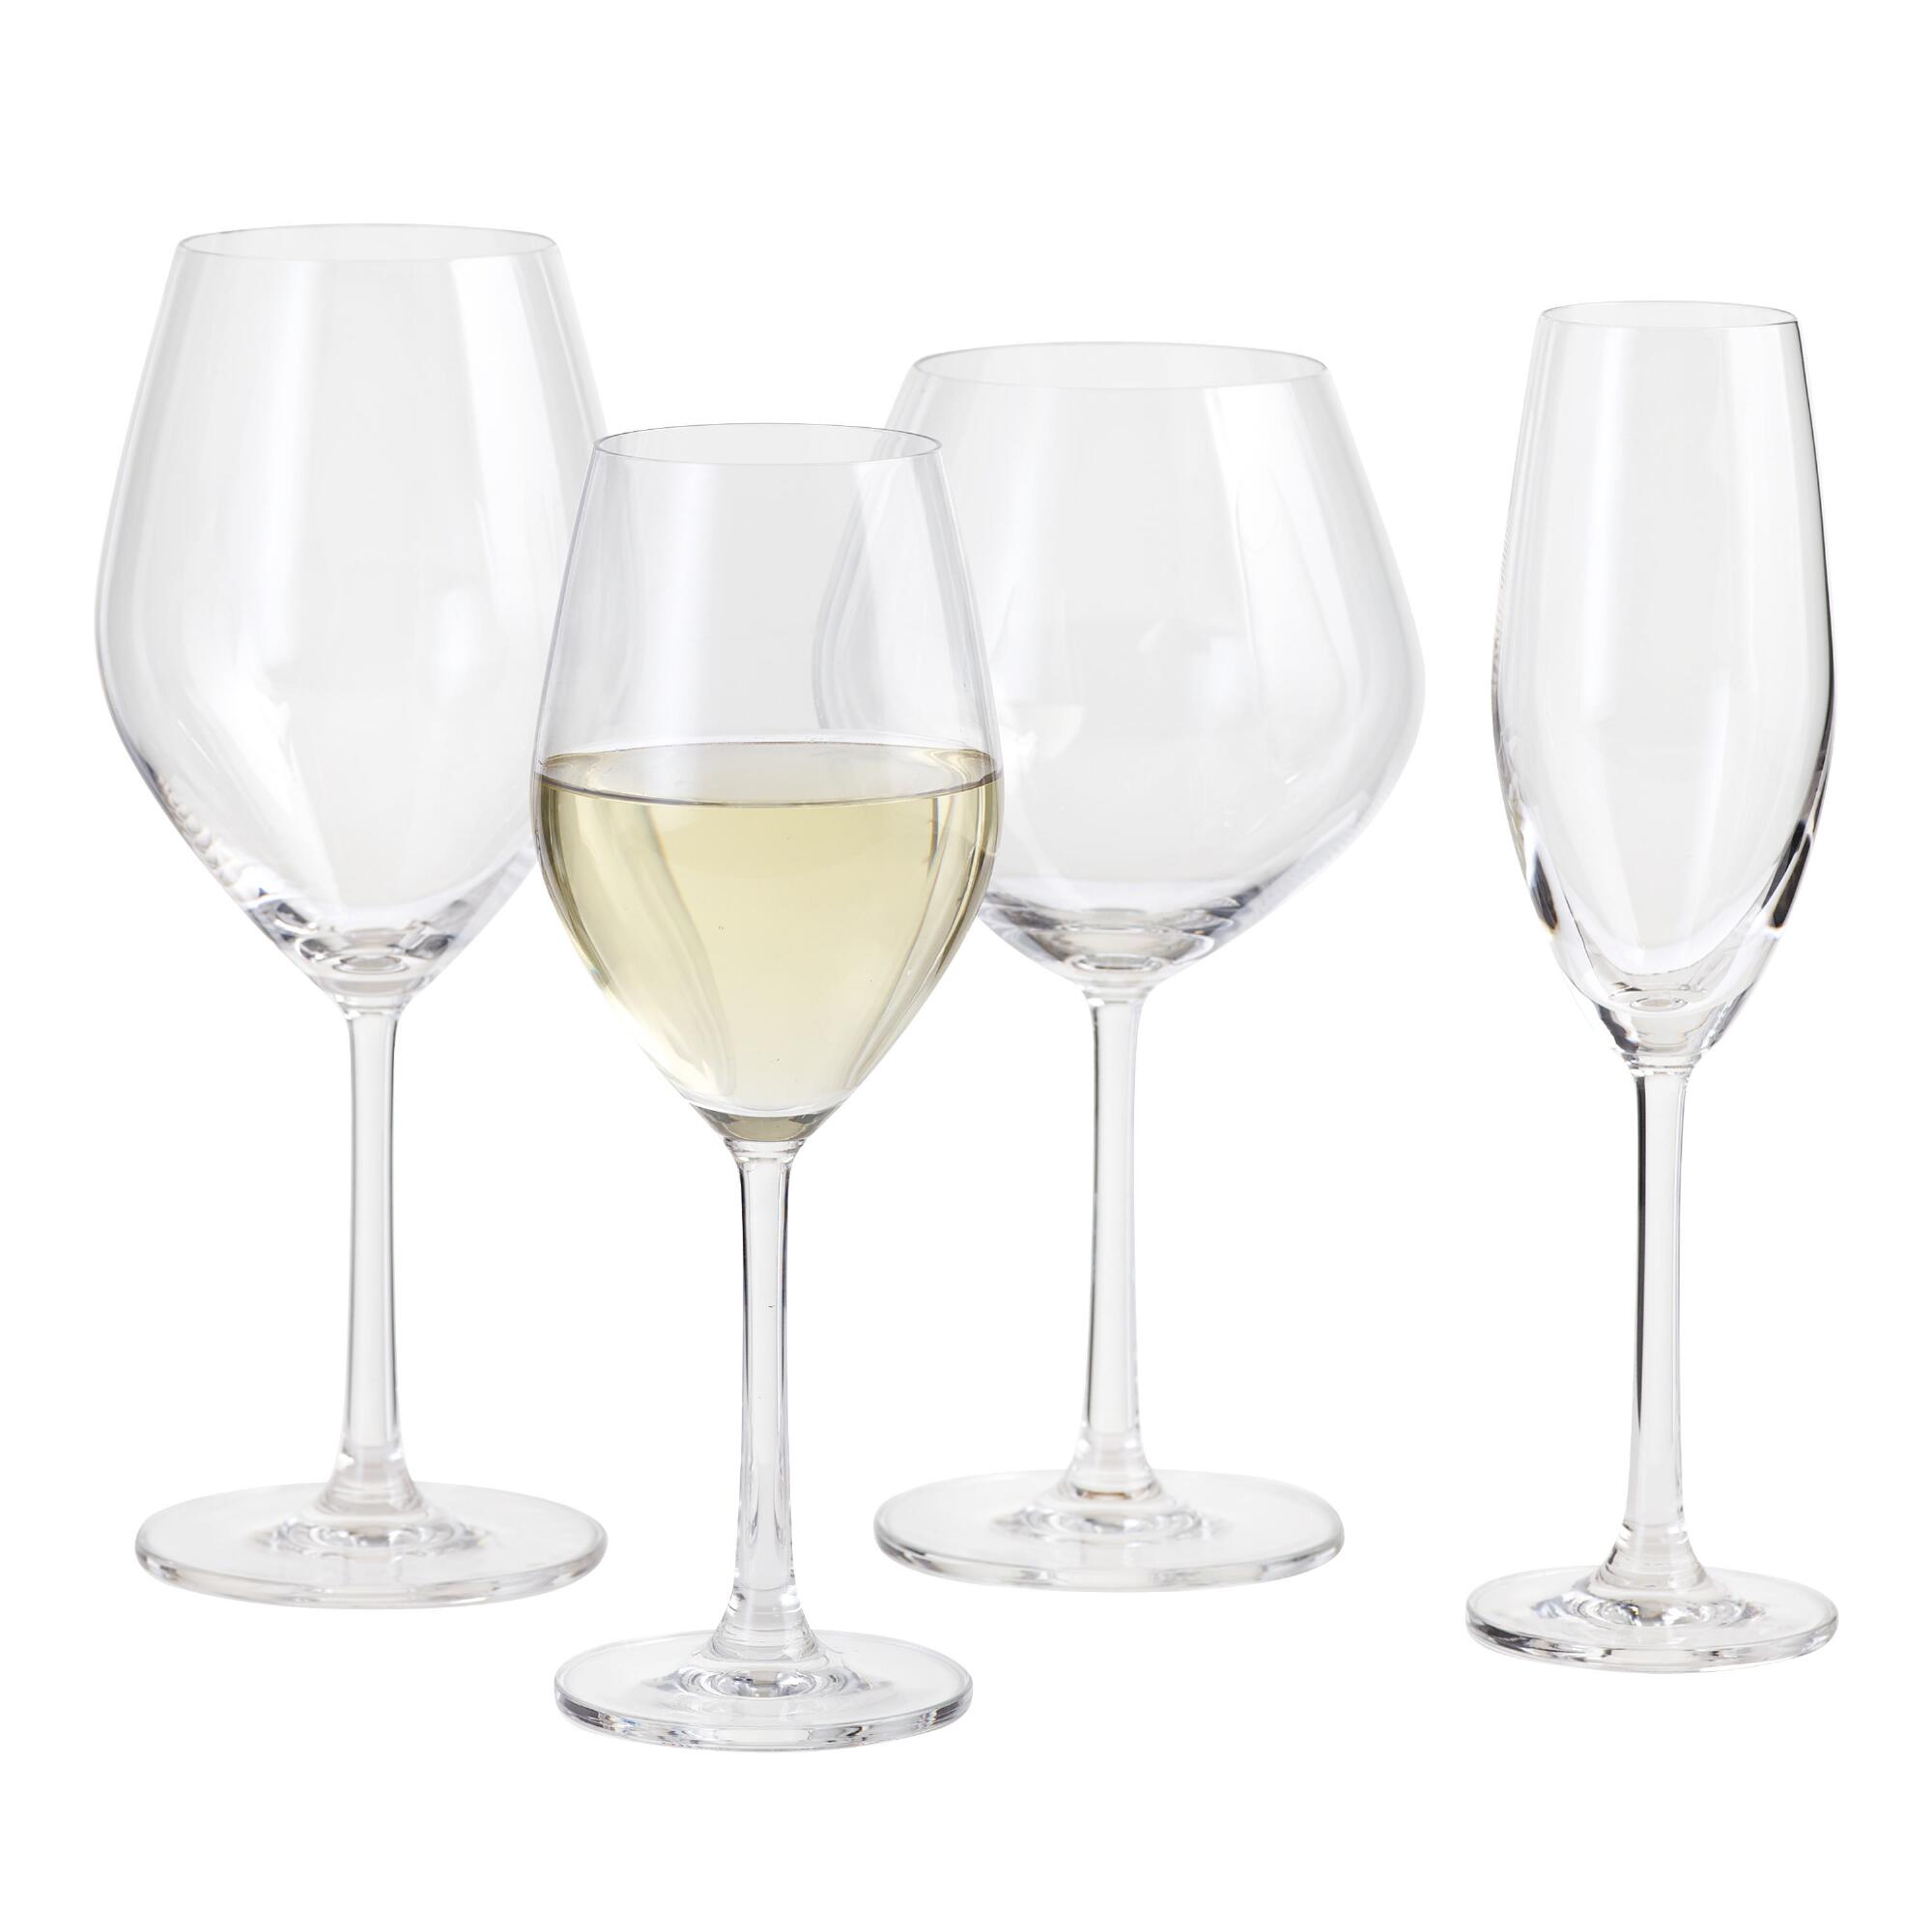 Sante Glassware Collection by World Market